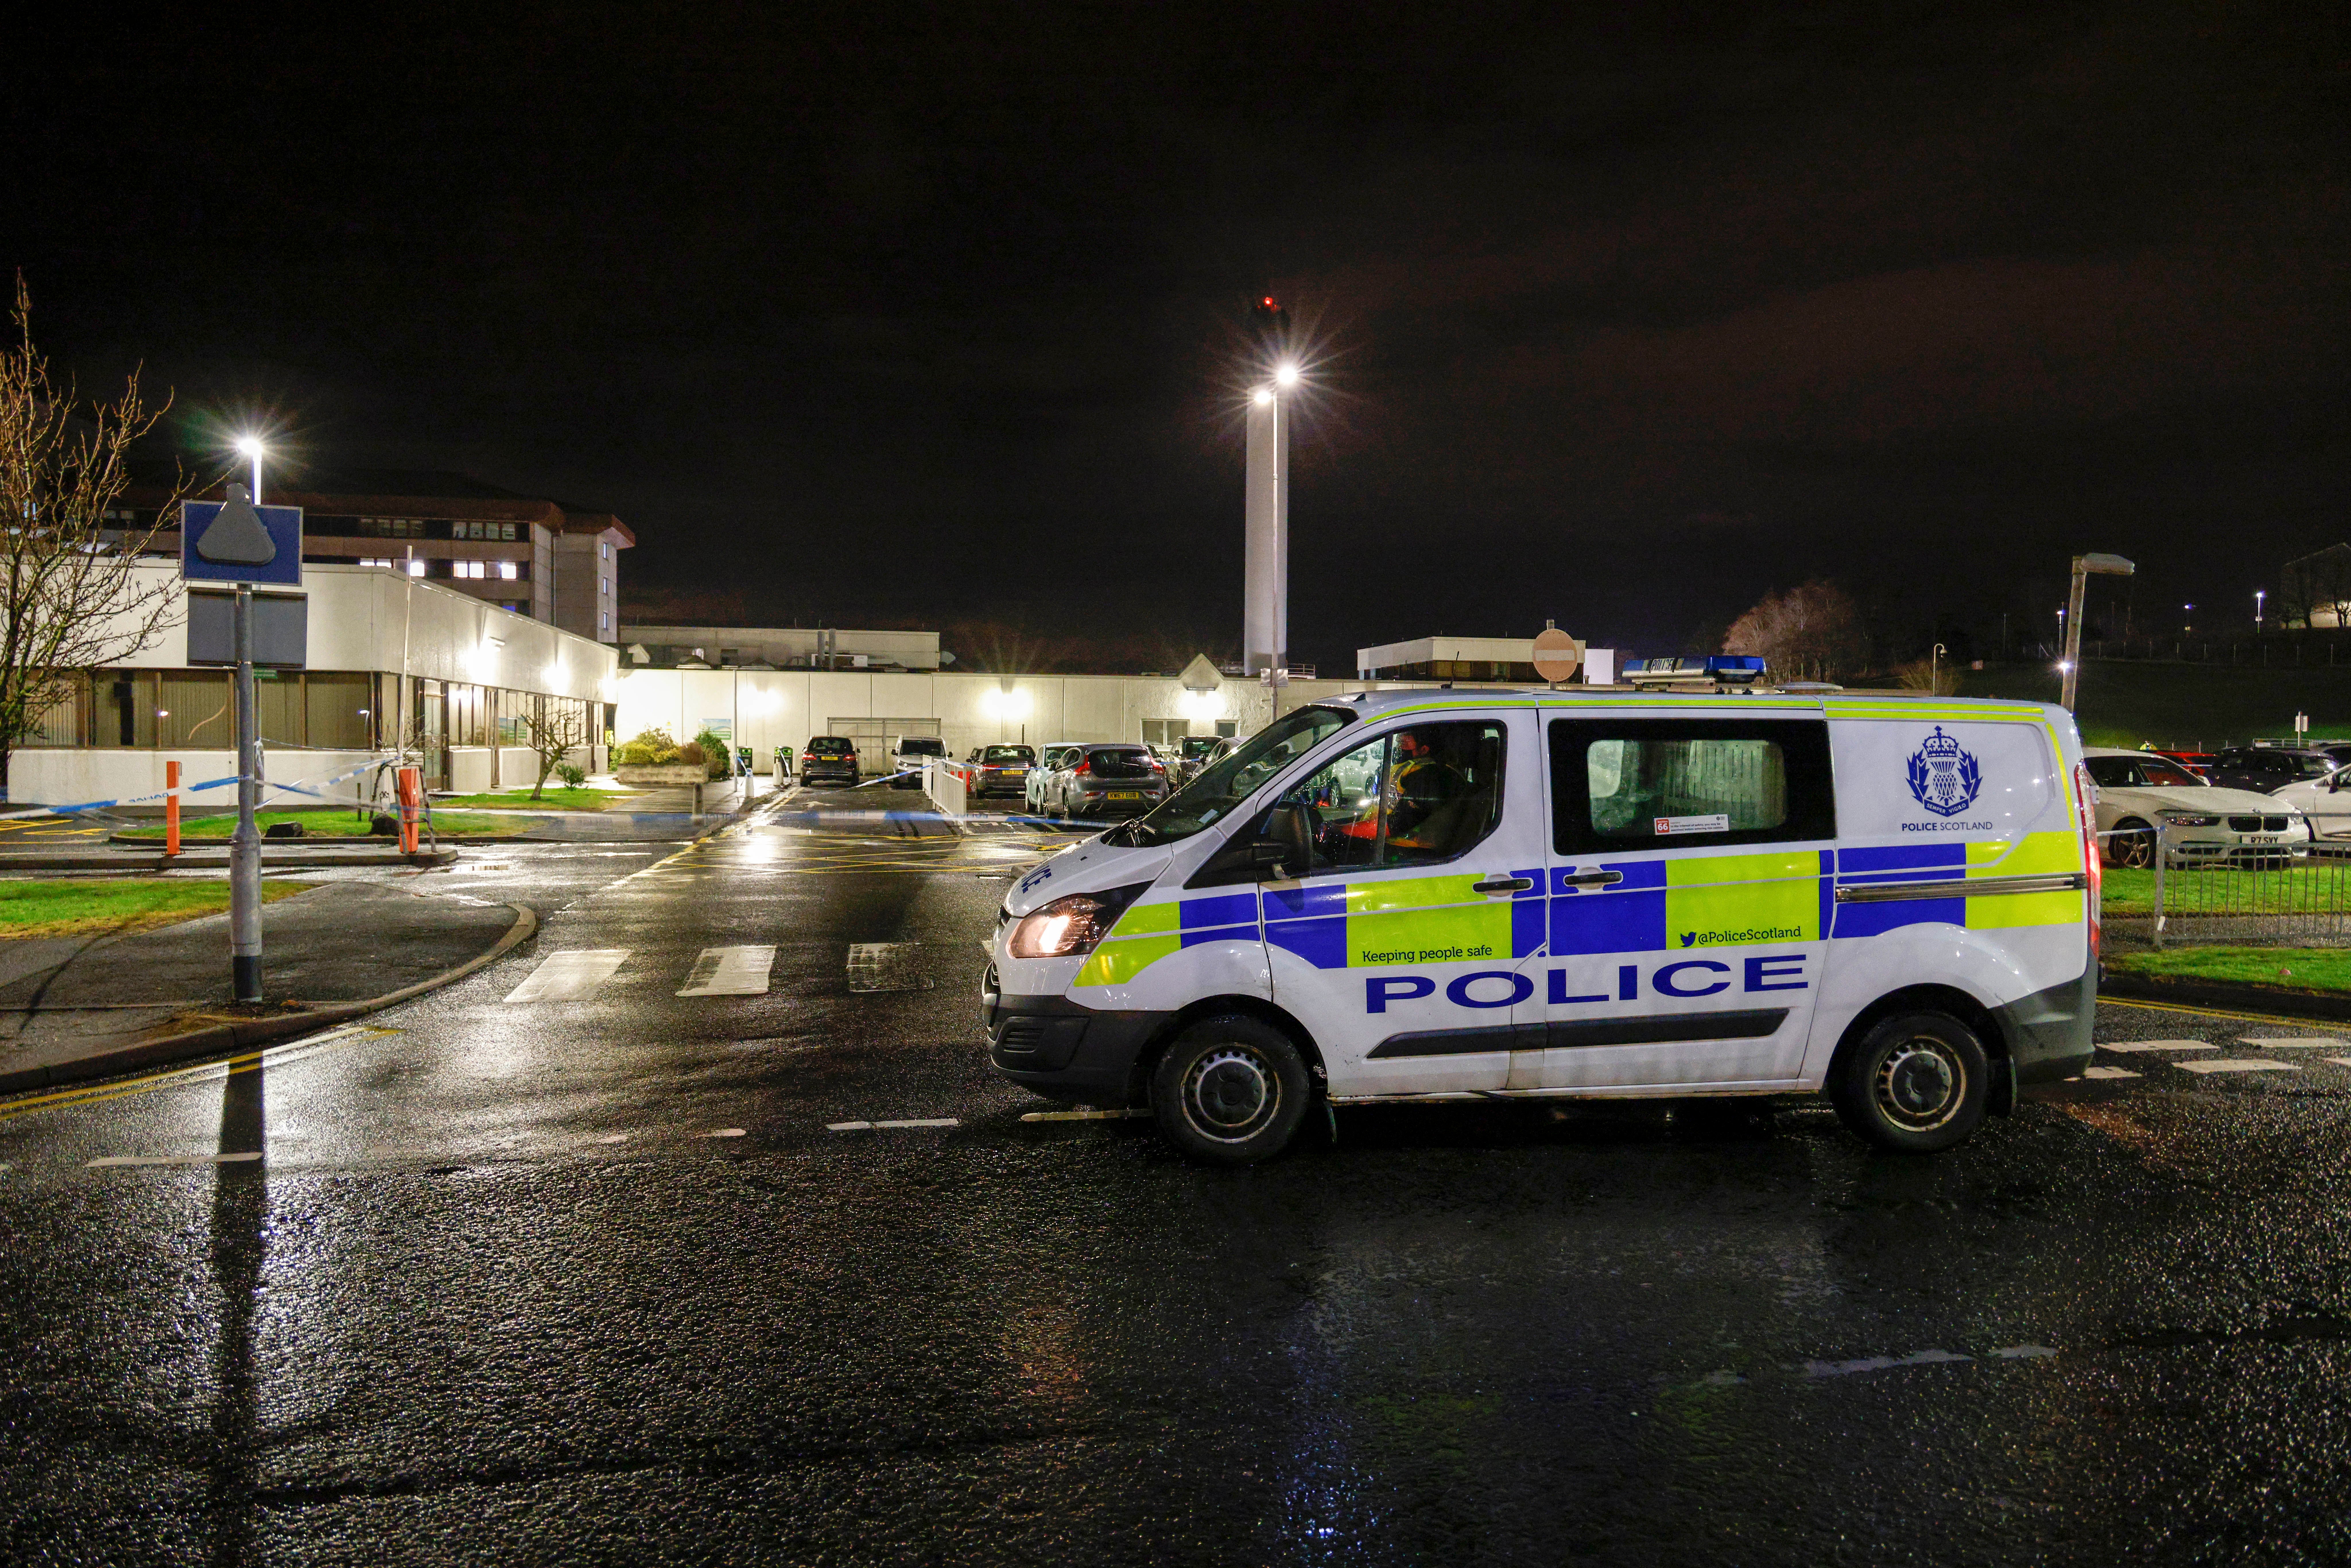 Police Scotland are investigating after an incident at University Hospital Crosshouse on February 4, 2021 in Kilmarnock, East Ayrshire, Scotland.